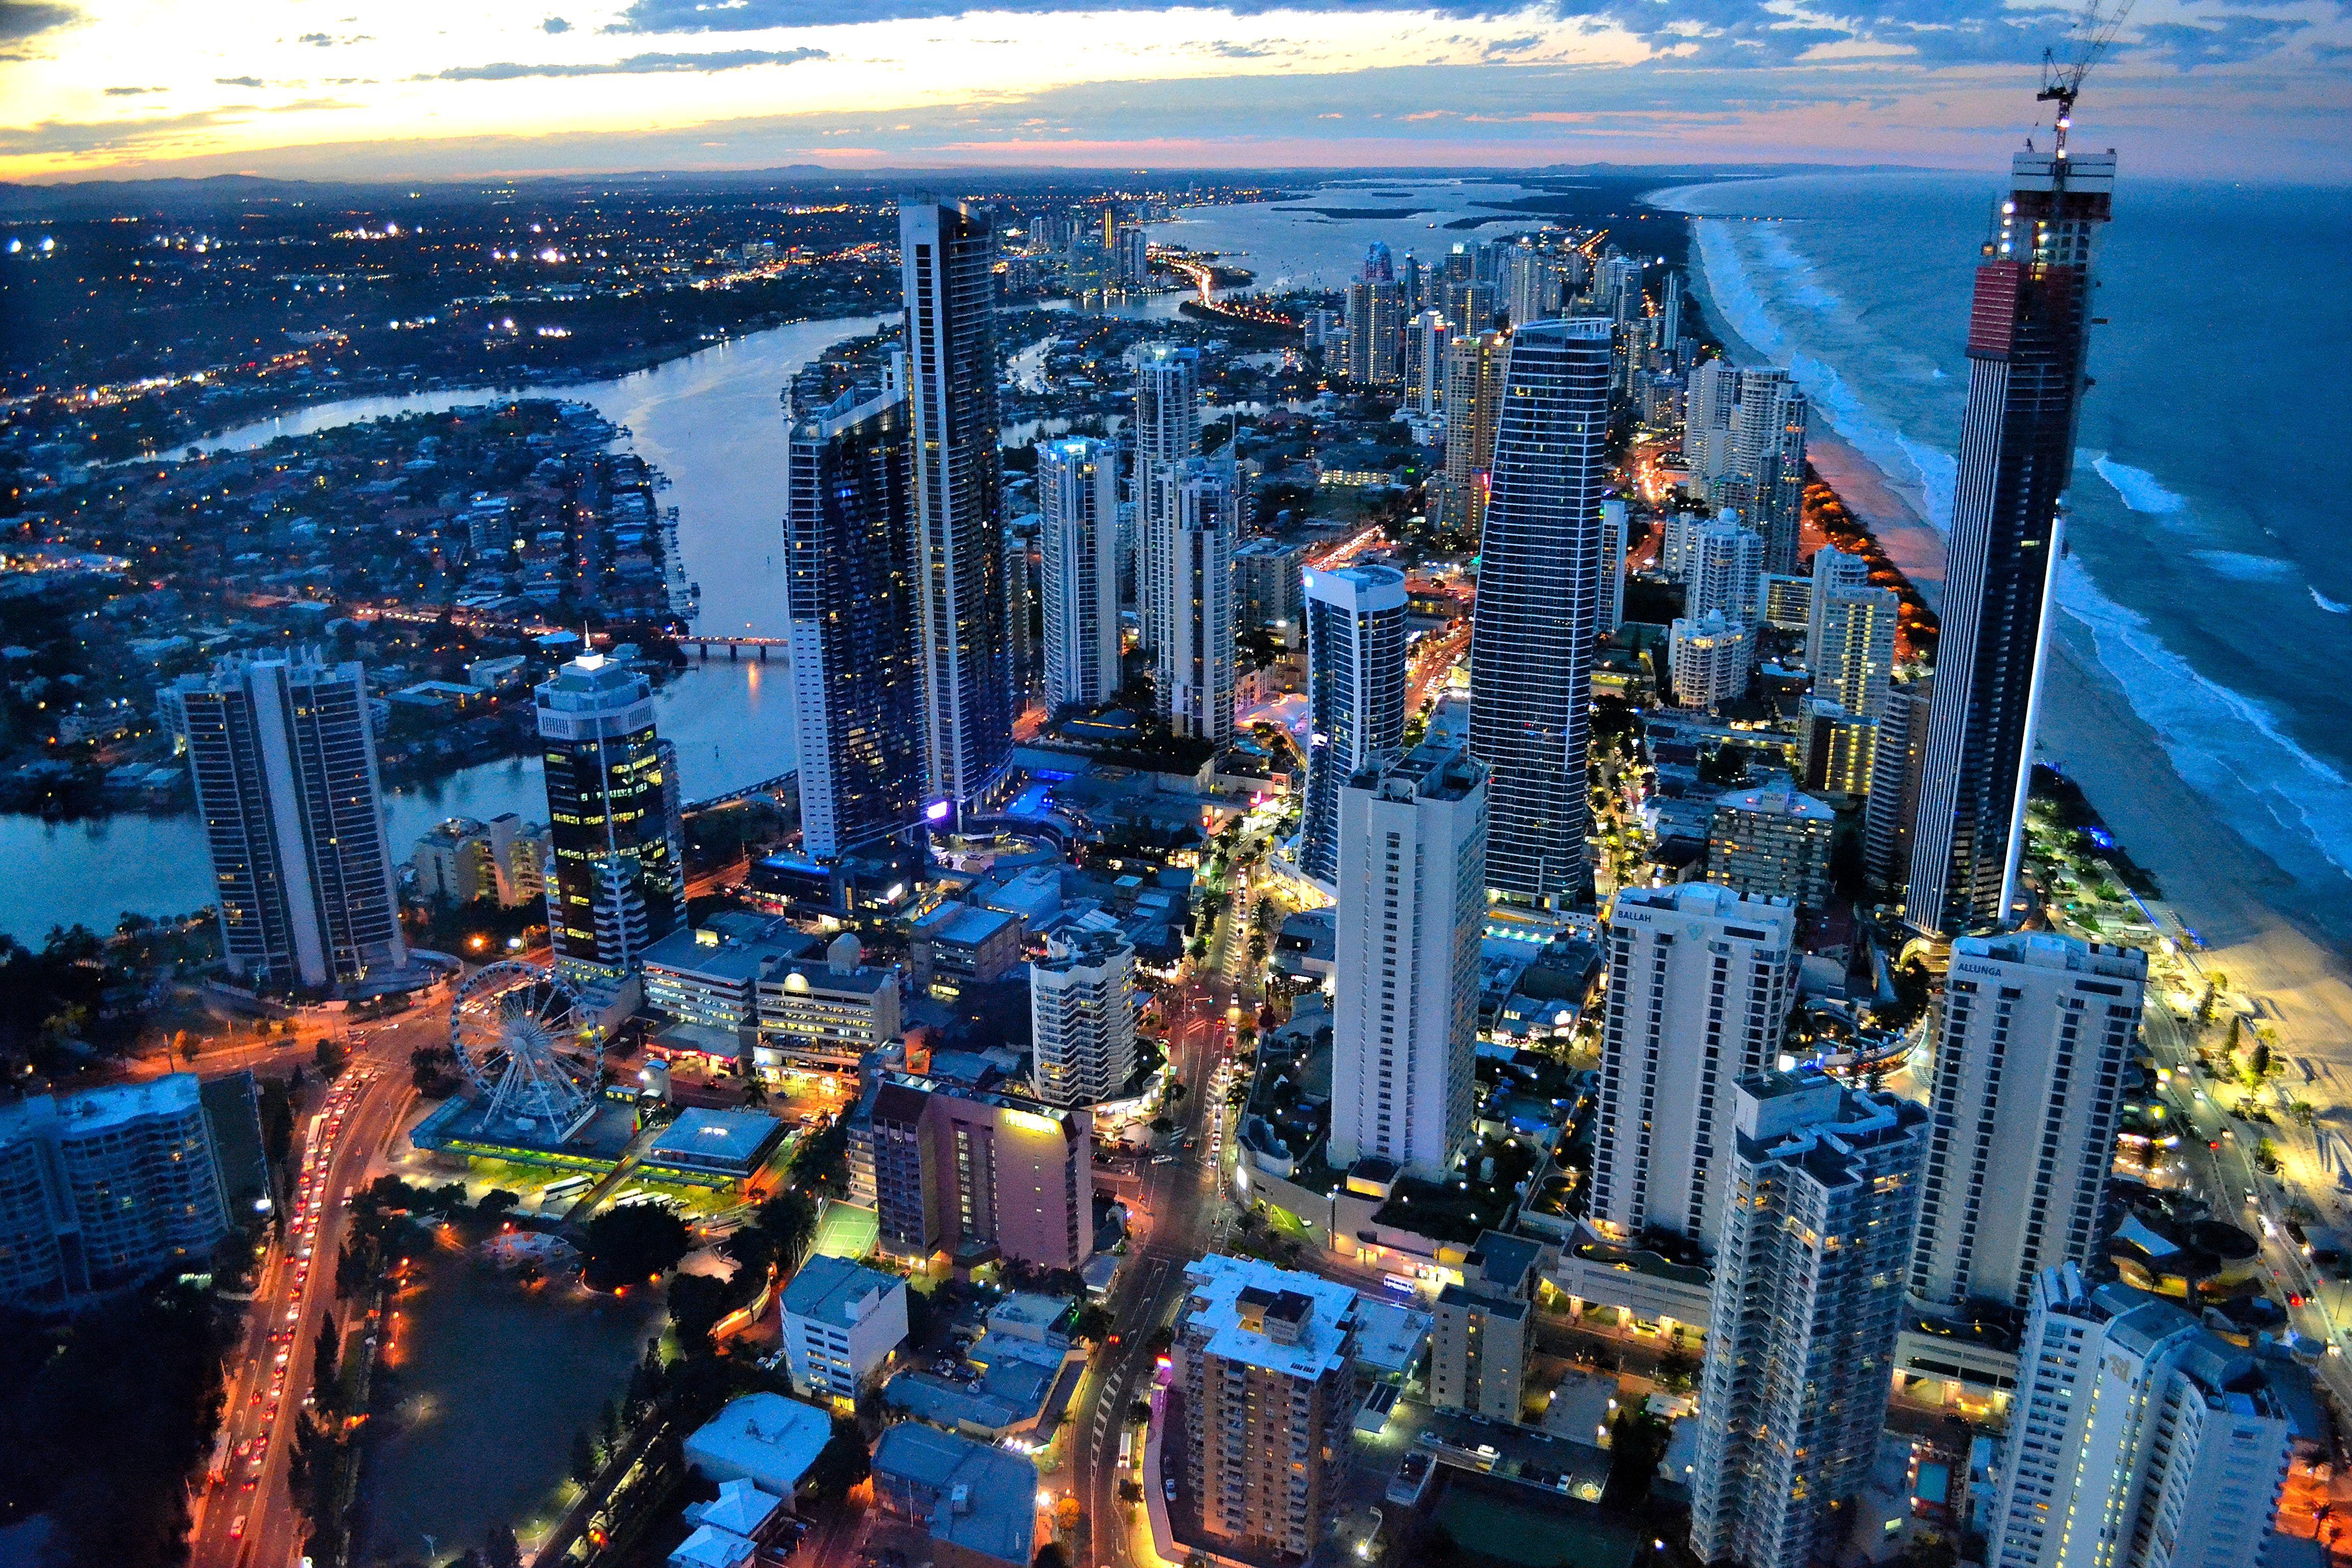 Gold Coast From Q1 4k Ultra HD Wallpaper. Background Image